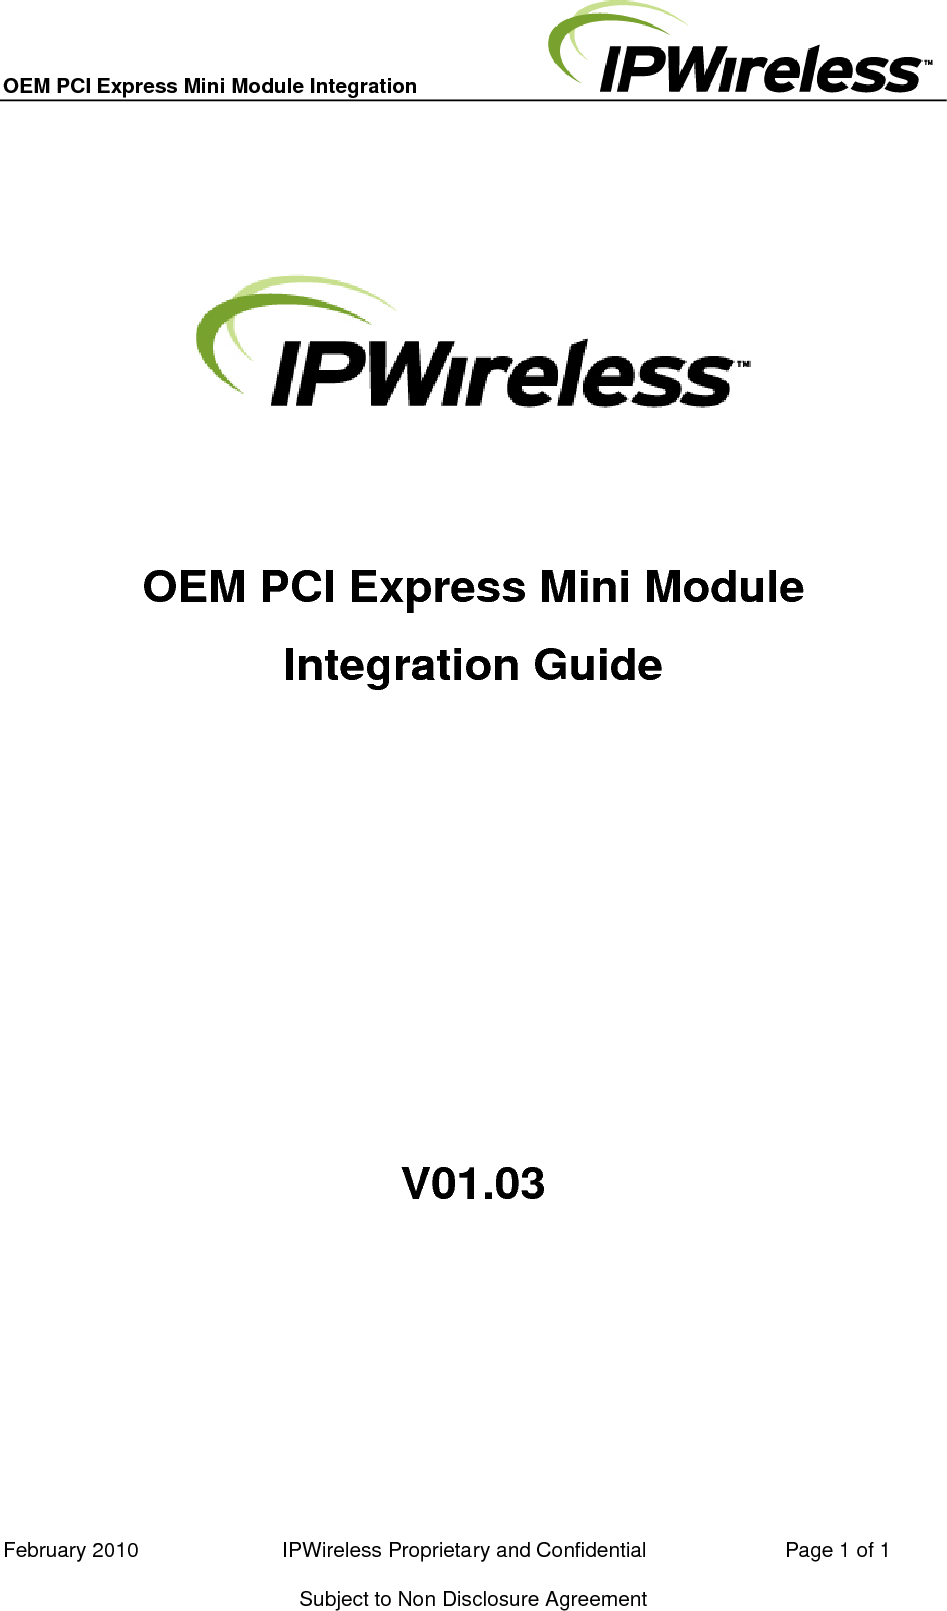 OEM PCI Express Mini Module Integration           OEM PCI Express Mini Module Integration Guide       V01.03    February 2010                         IPWireless Proprietary and Confidential                        Page 1 of 1 Subject to Non Disclosure Agreement 